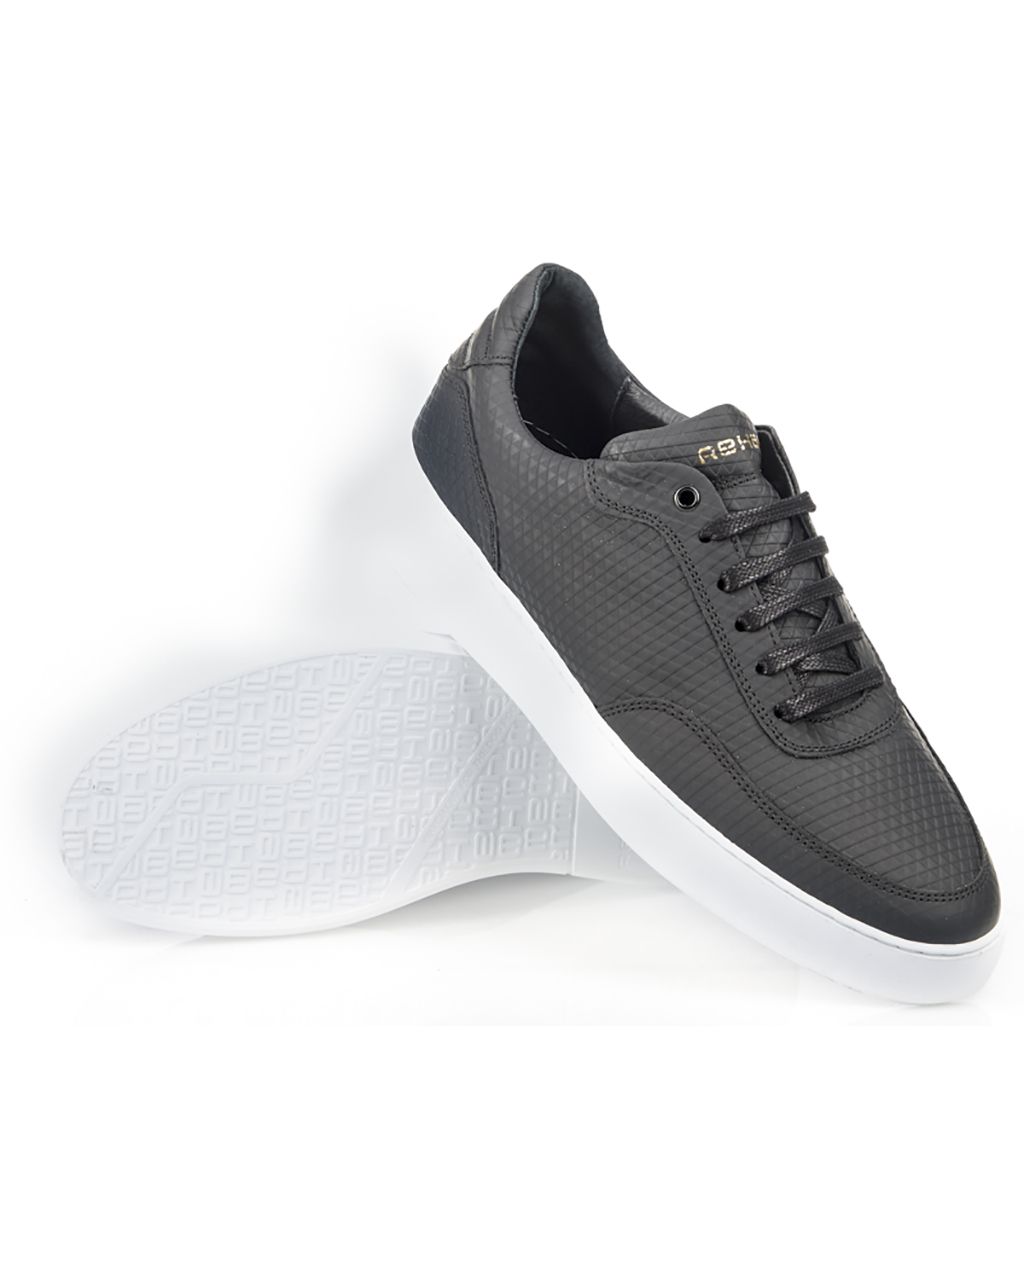 REHAB TAYLOR TRIANGLE Sneakers Zwart 071660-001-41